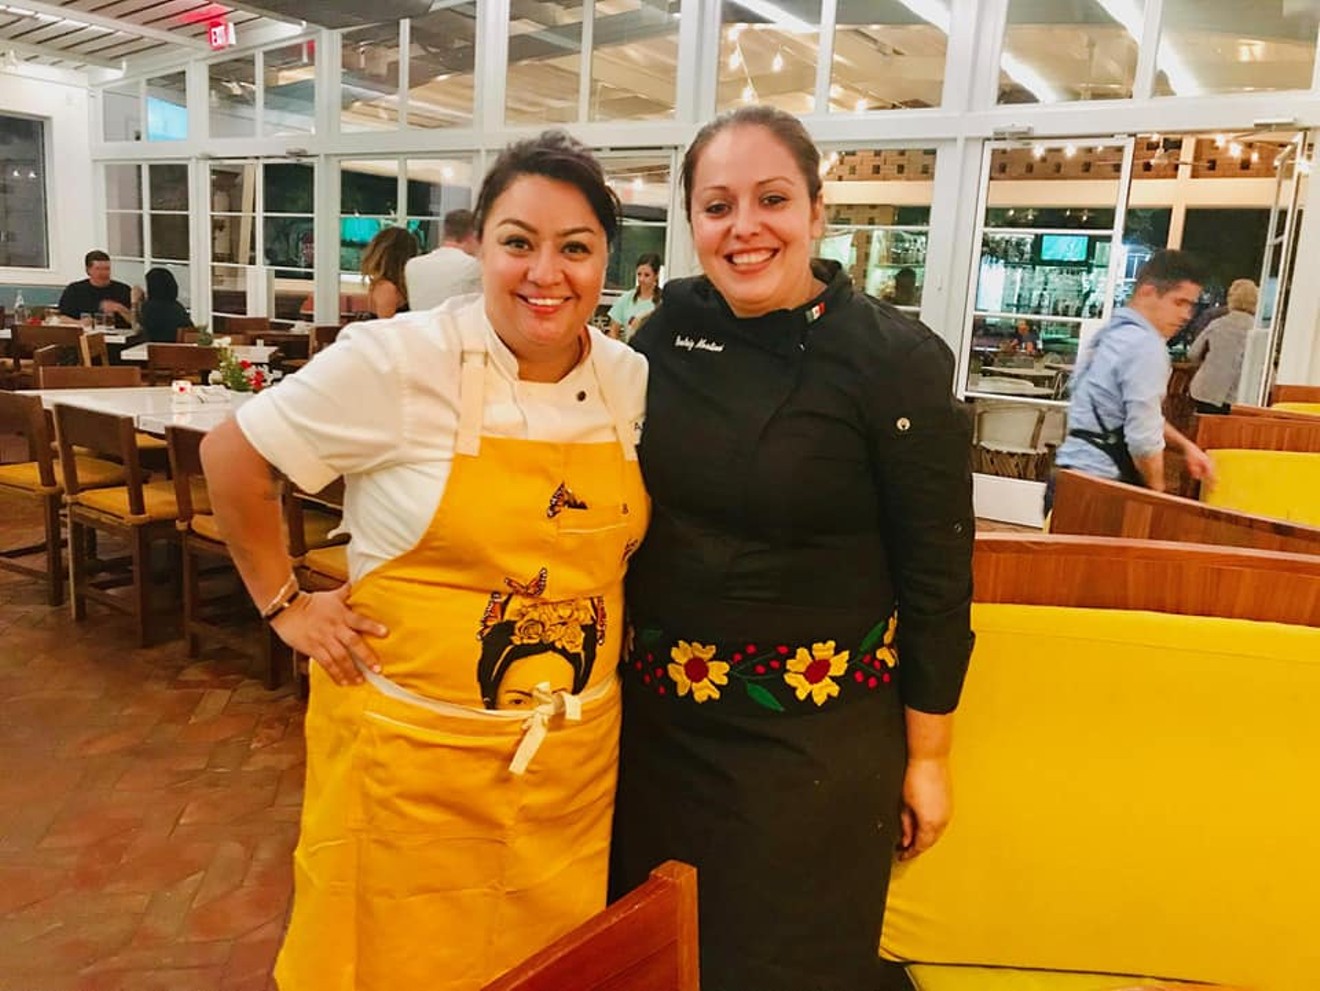 The executive chef of Jose kicked off a guest pop-up series in September with chef Beatriz Martines (right).